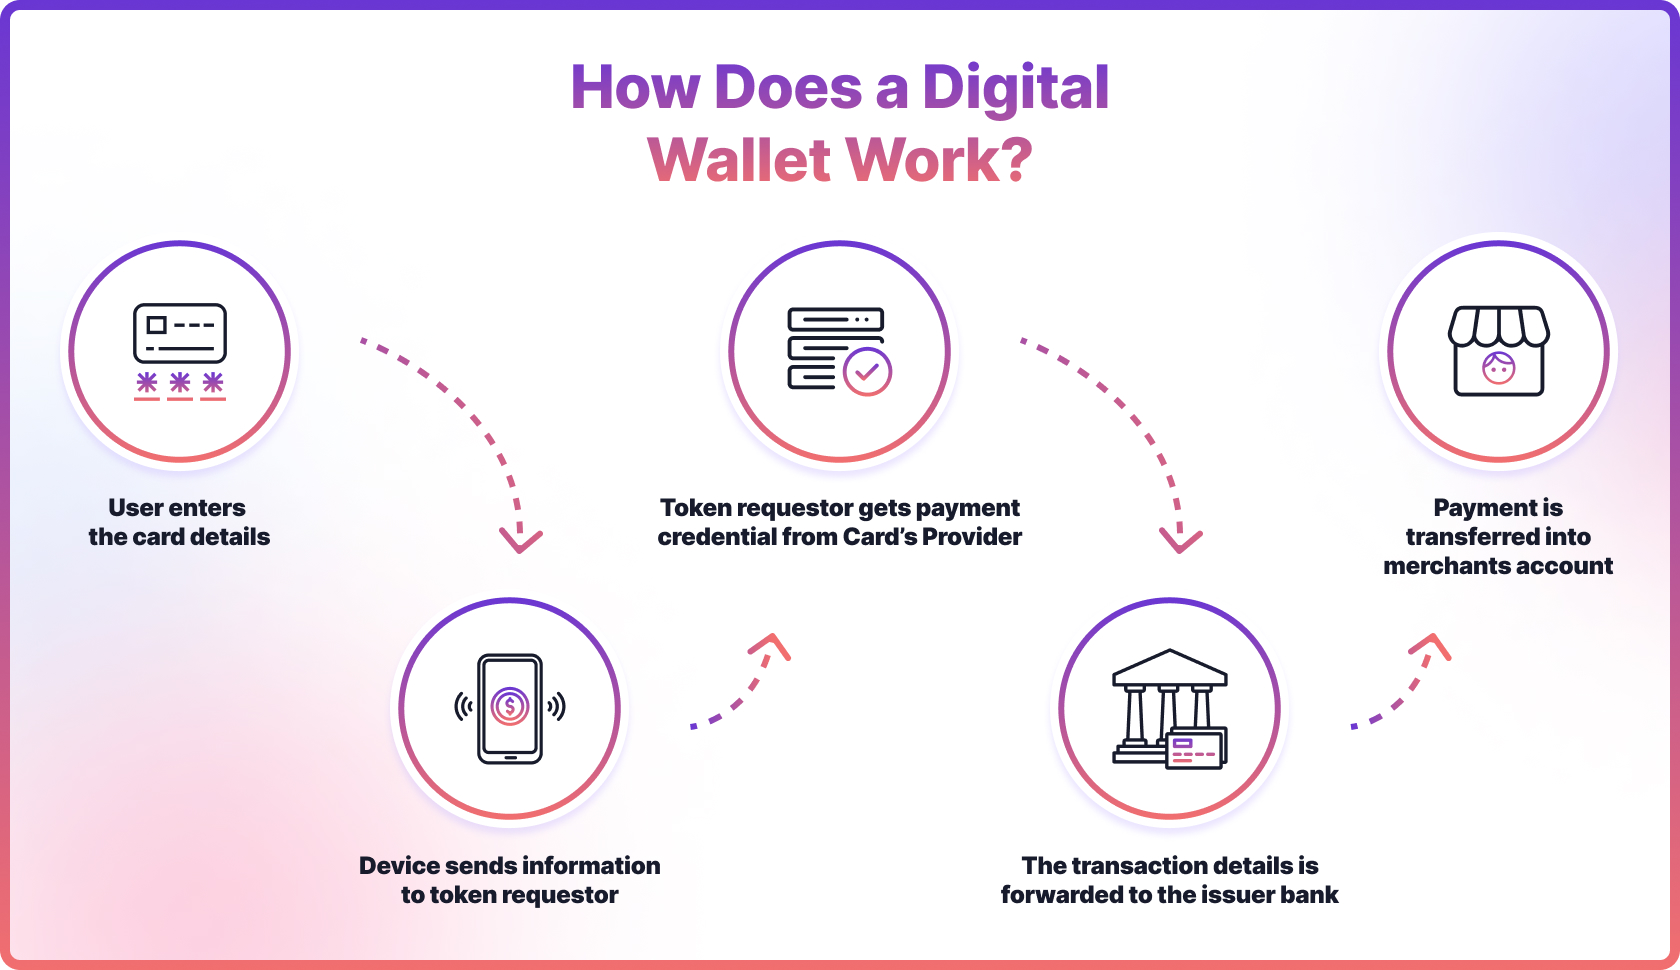 how does a digital wallet work?